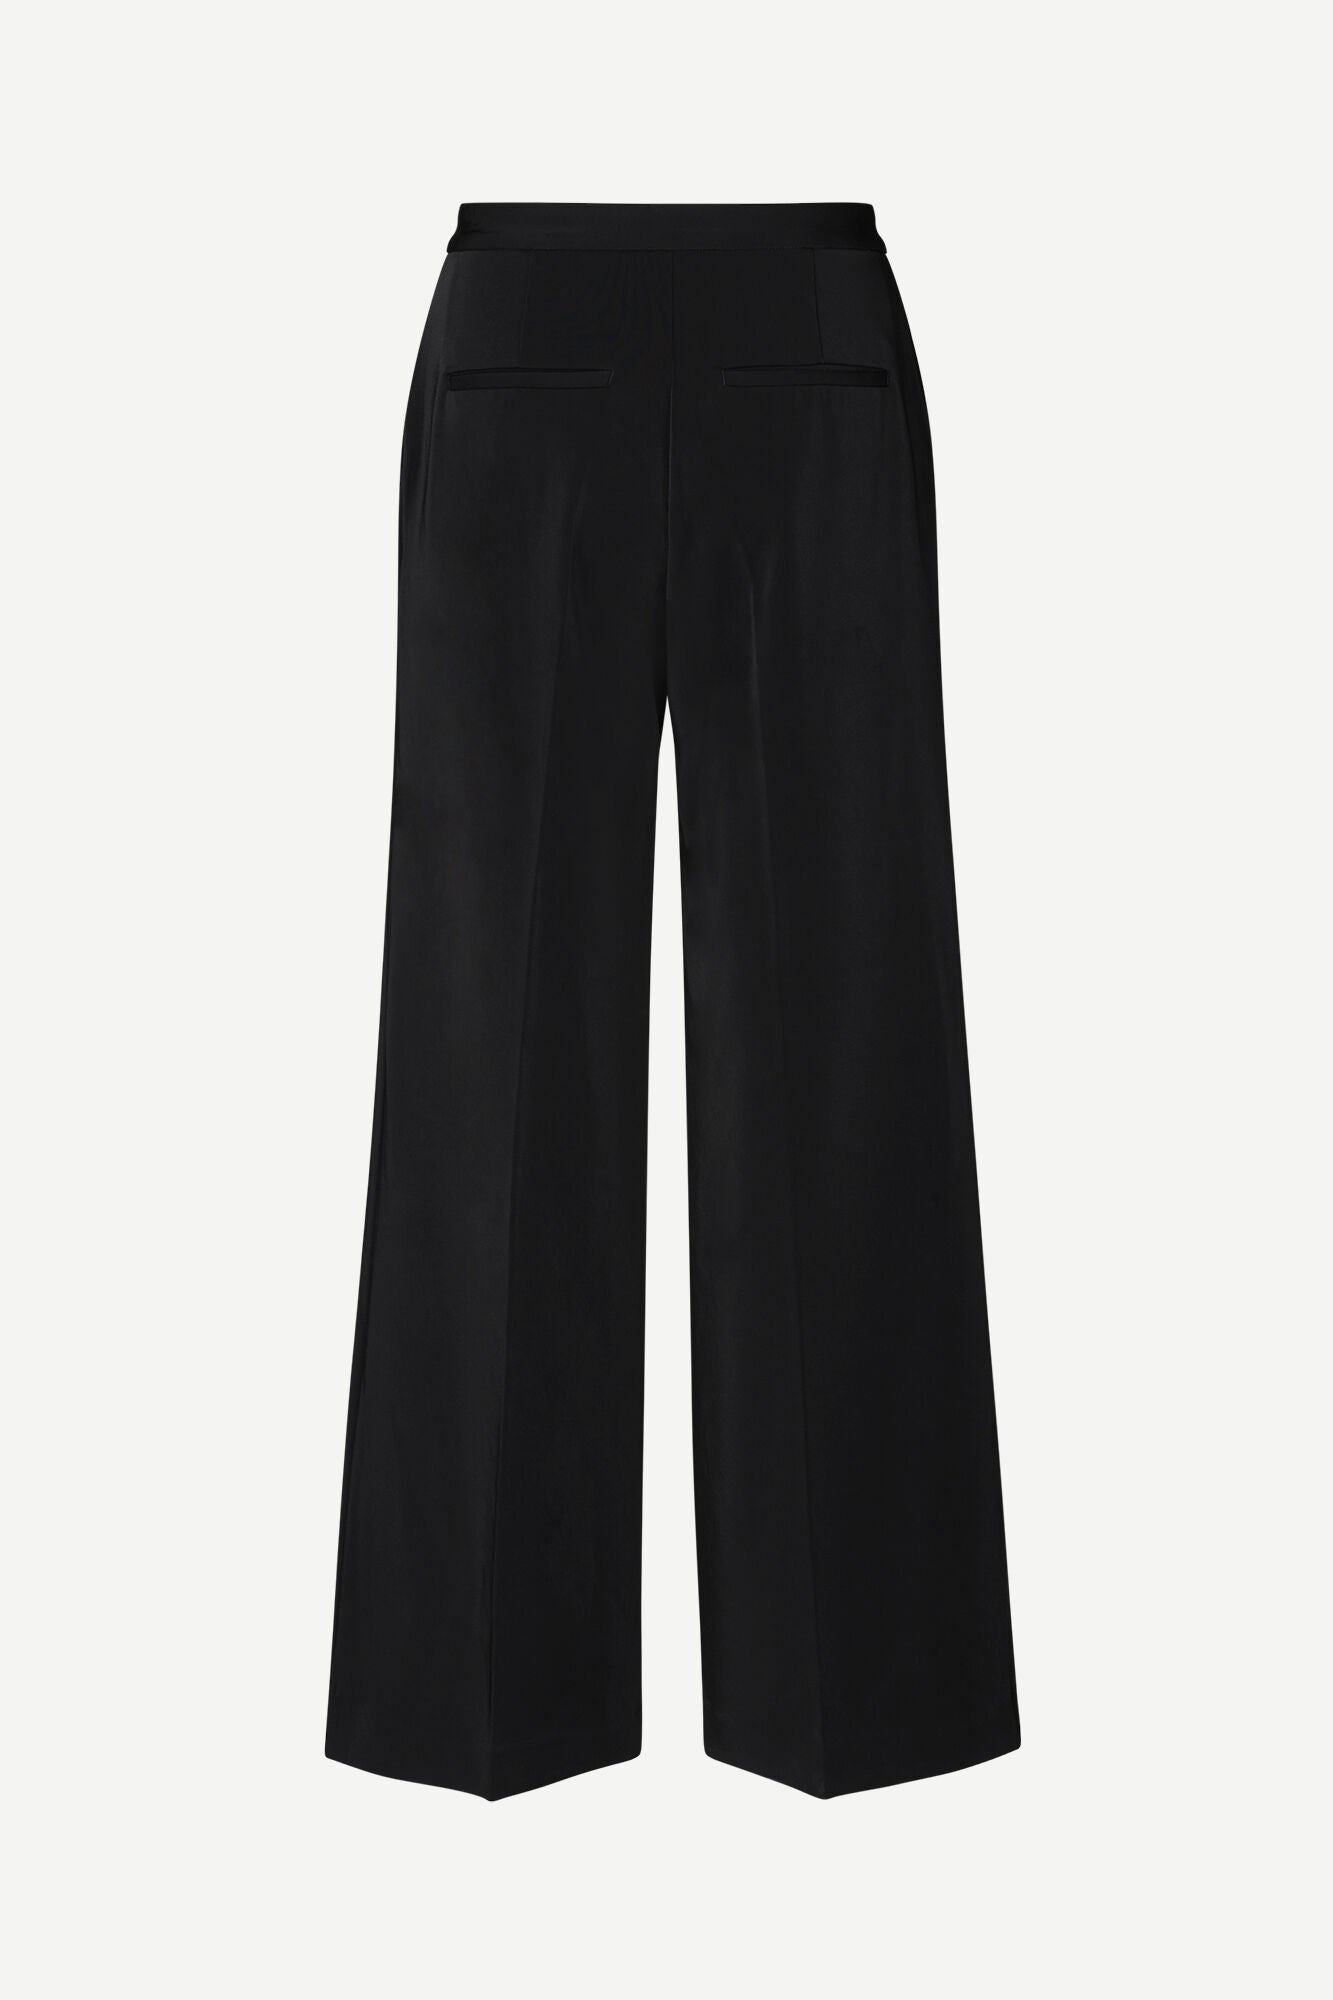 COLLOT WIDE LEG TROUSERS IN BLACK